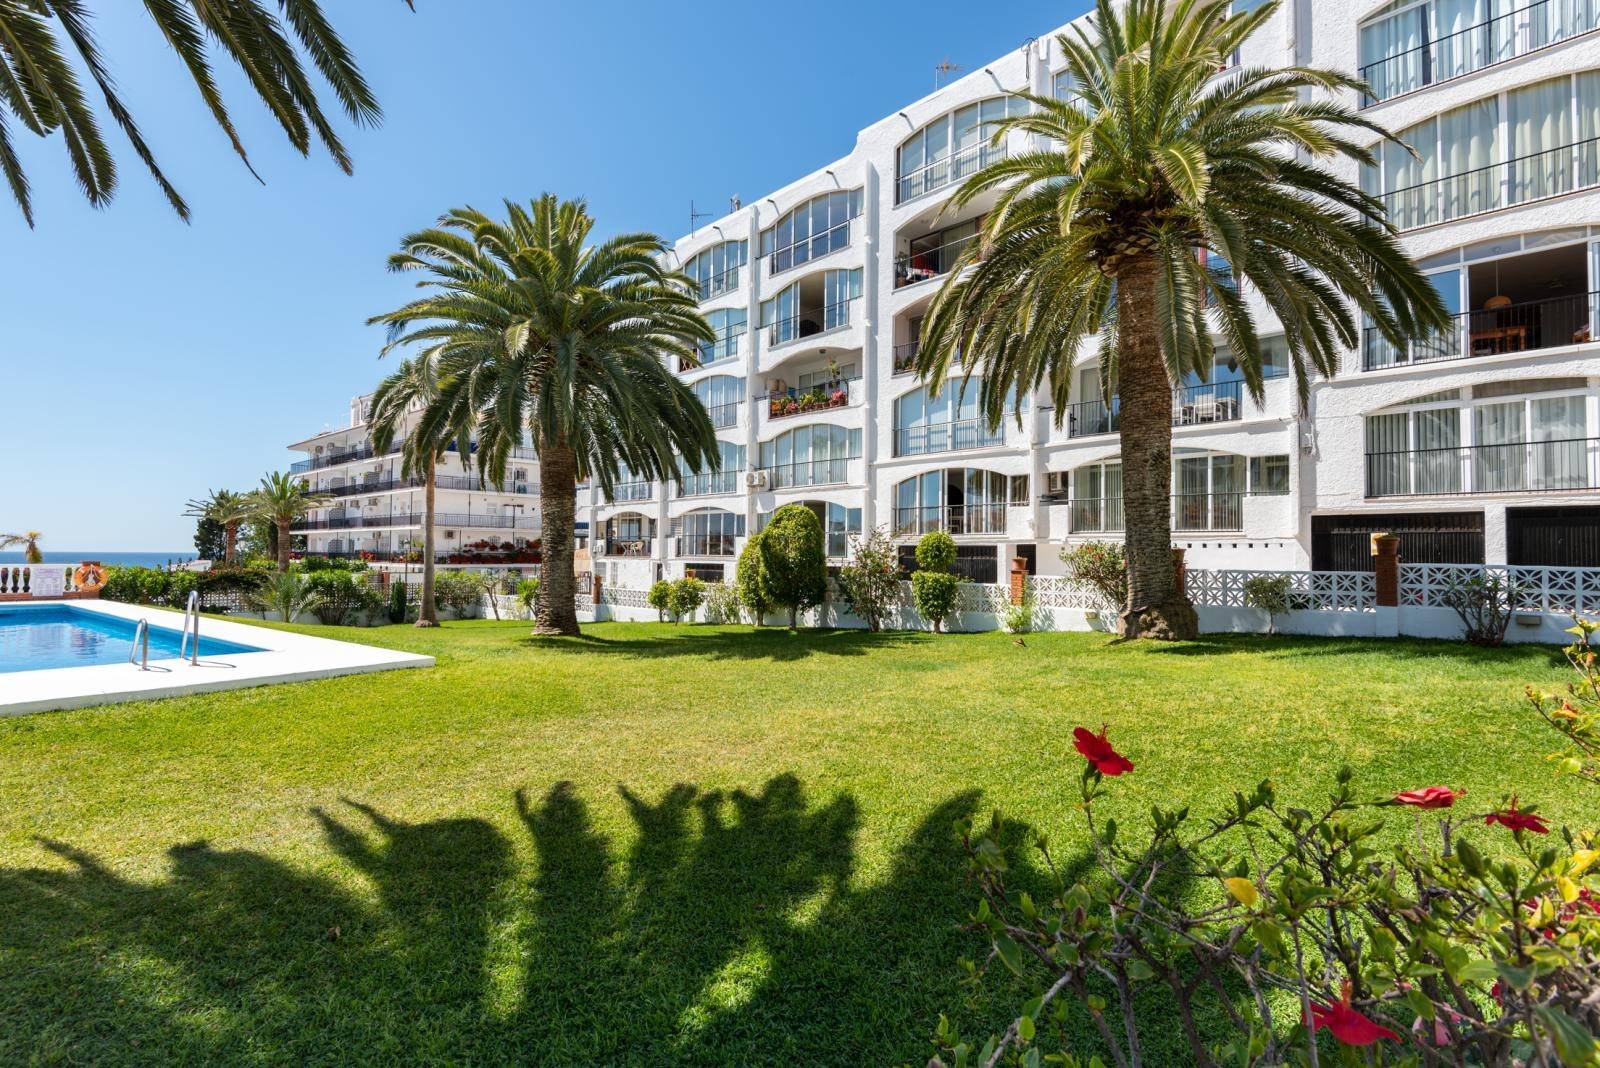 Apartment for sale in Nerja, Hotel Parador & Carabeo area